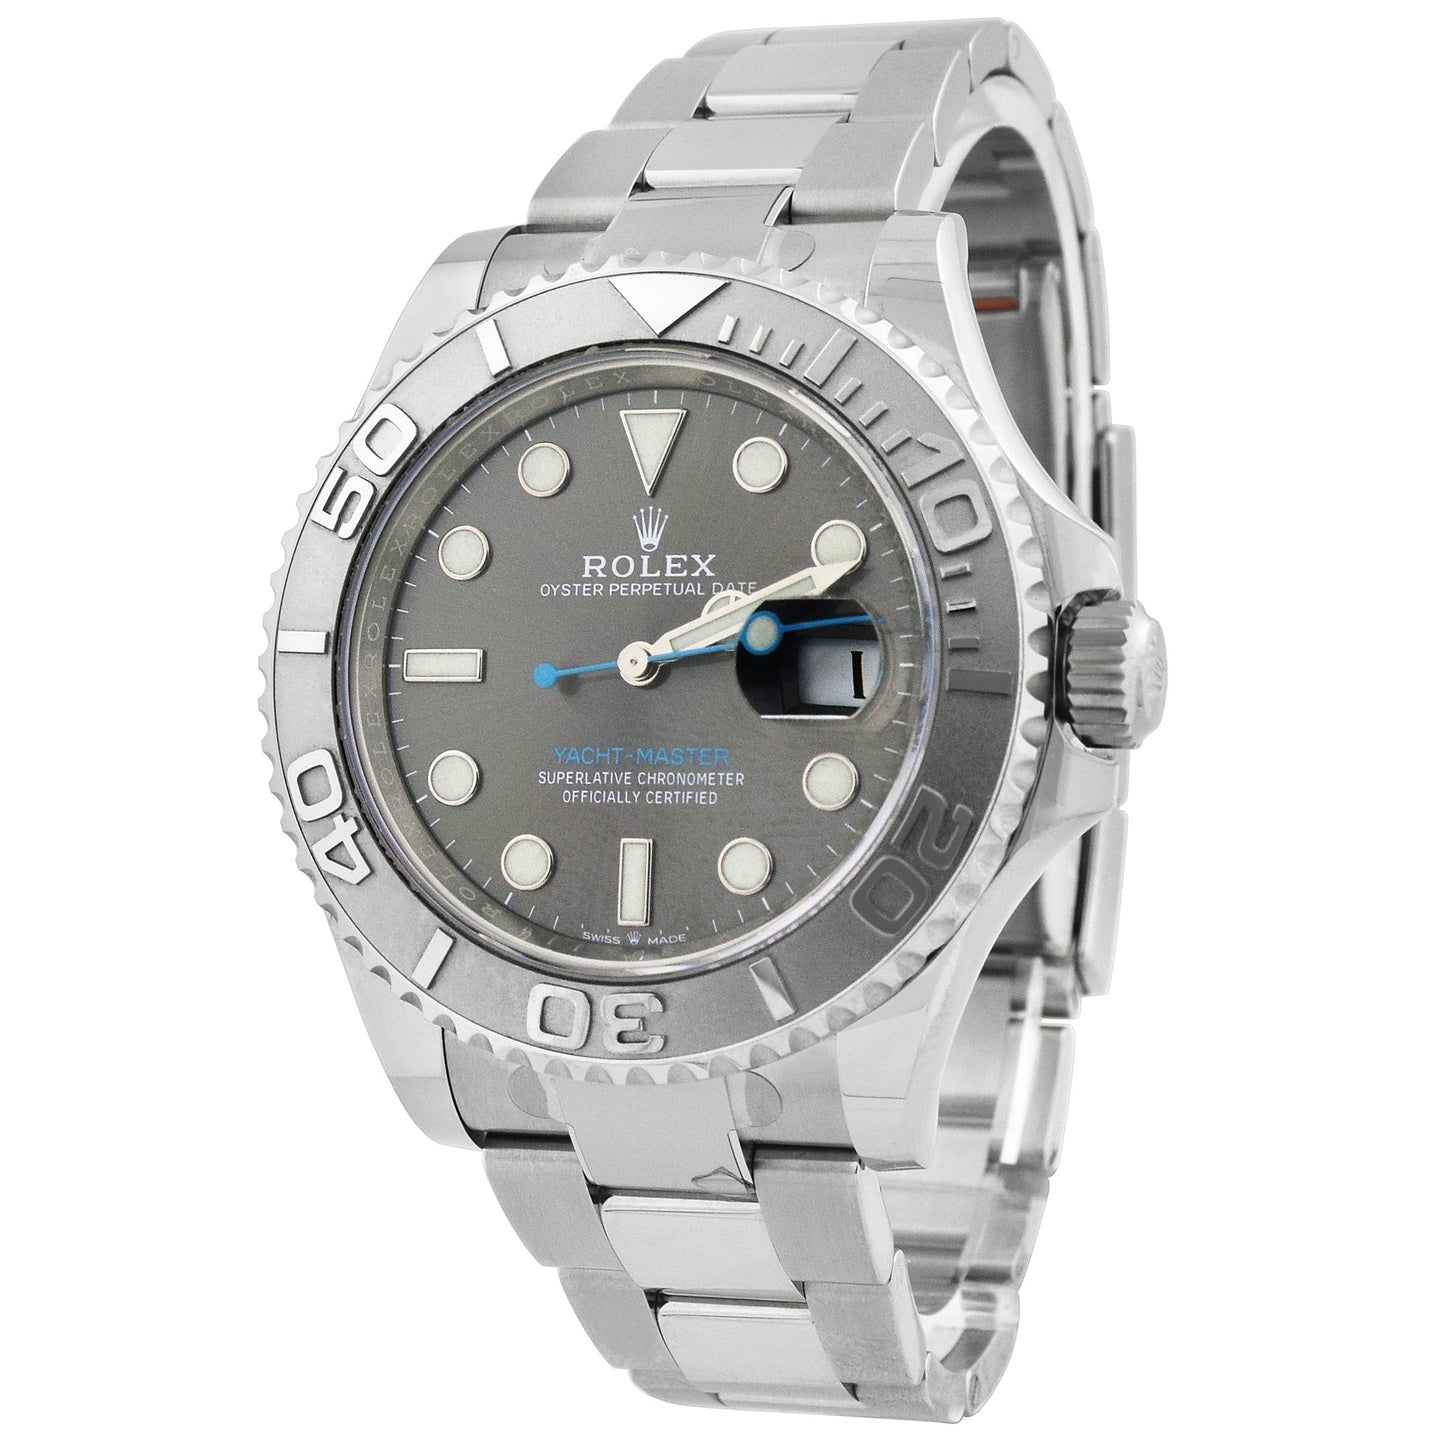 Rolex Yachtmaster Stainless Steel and Platinum 40mm Rhodium Dial Watch Reference#: 126622 - Happy Jewelers Fine Jewelry Lifetime Warranty